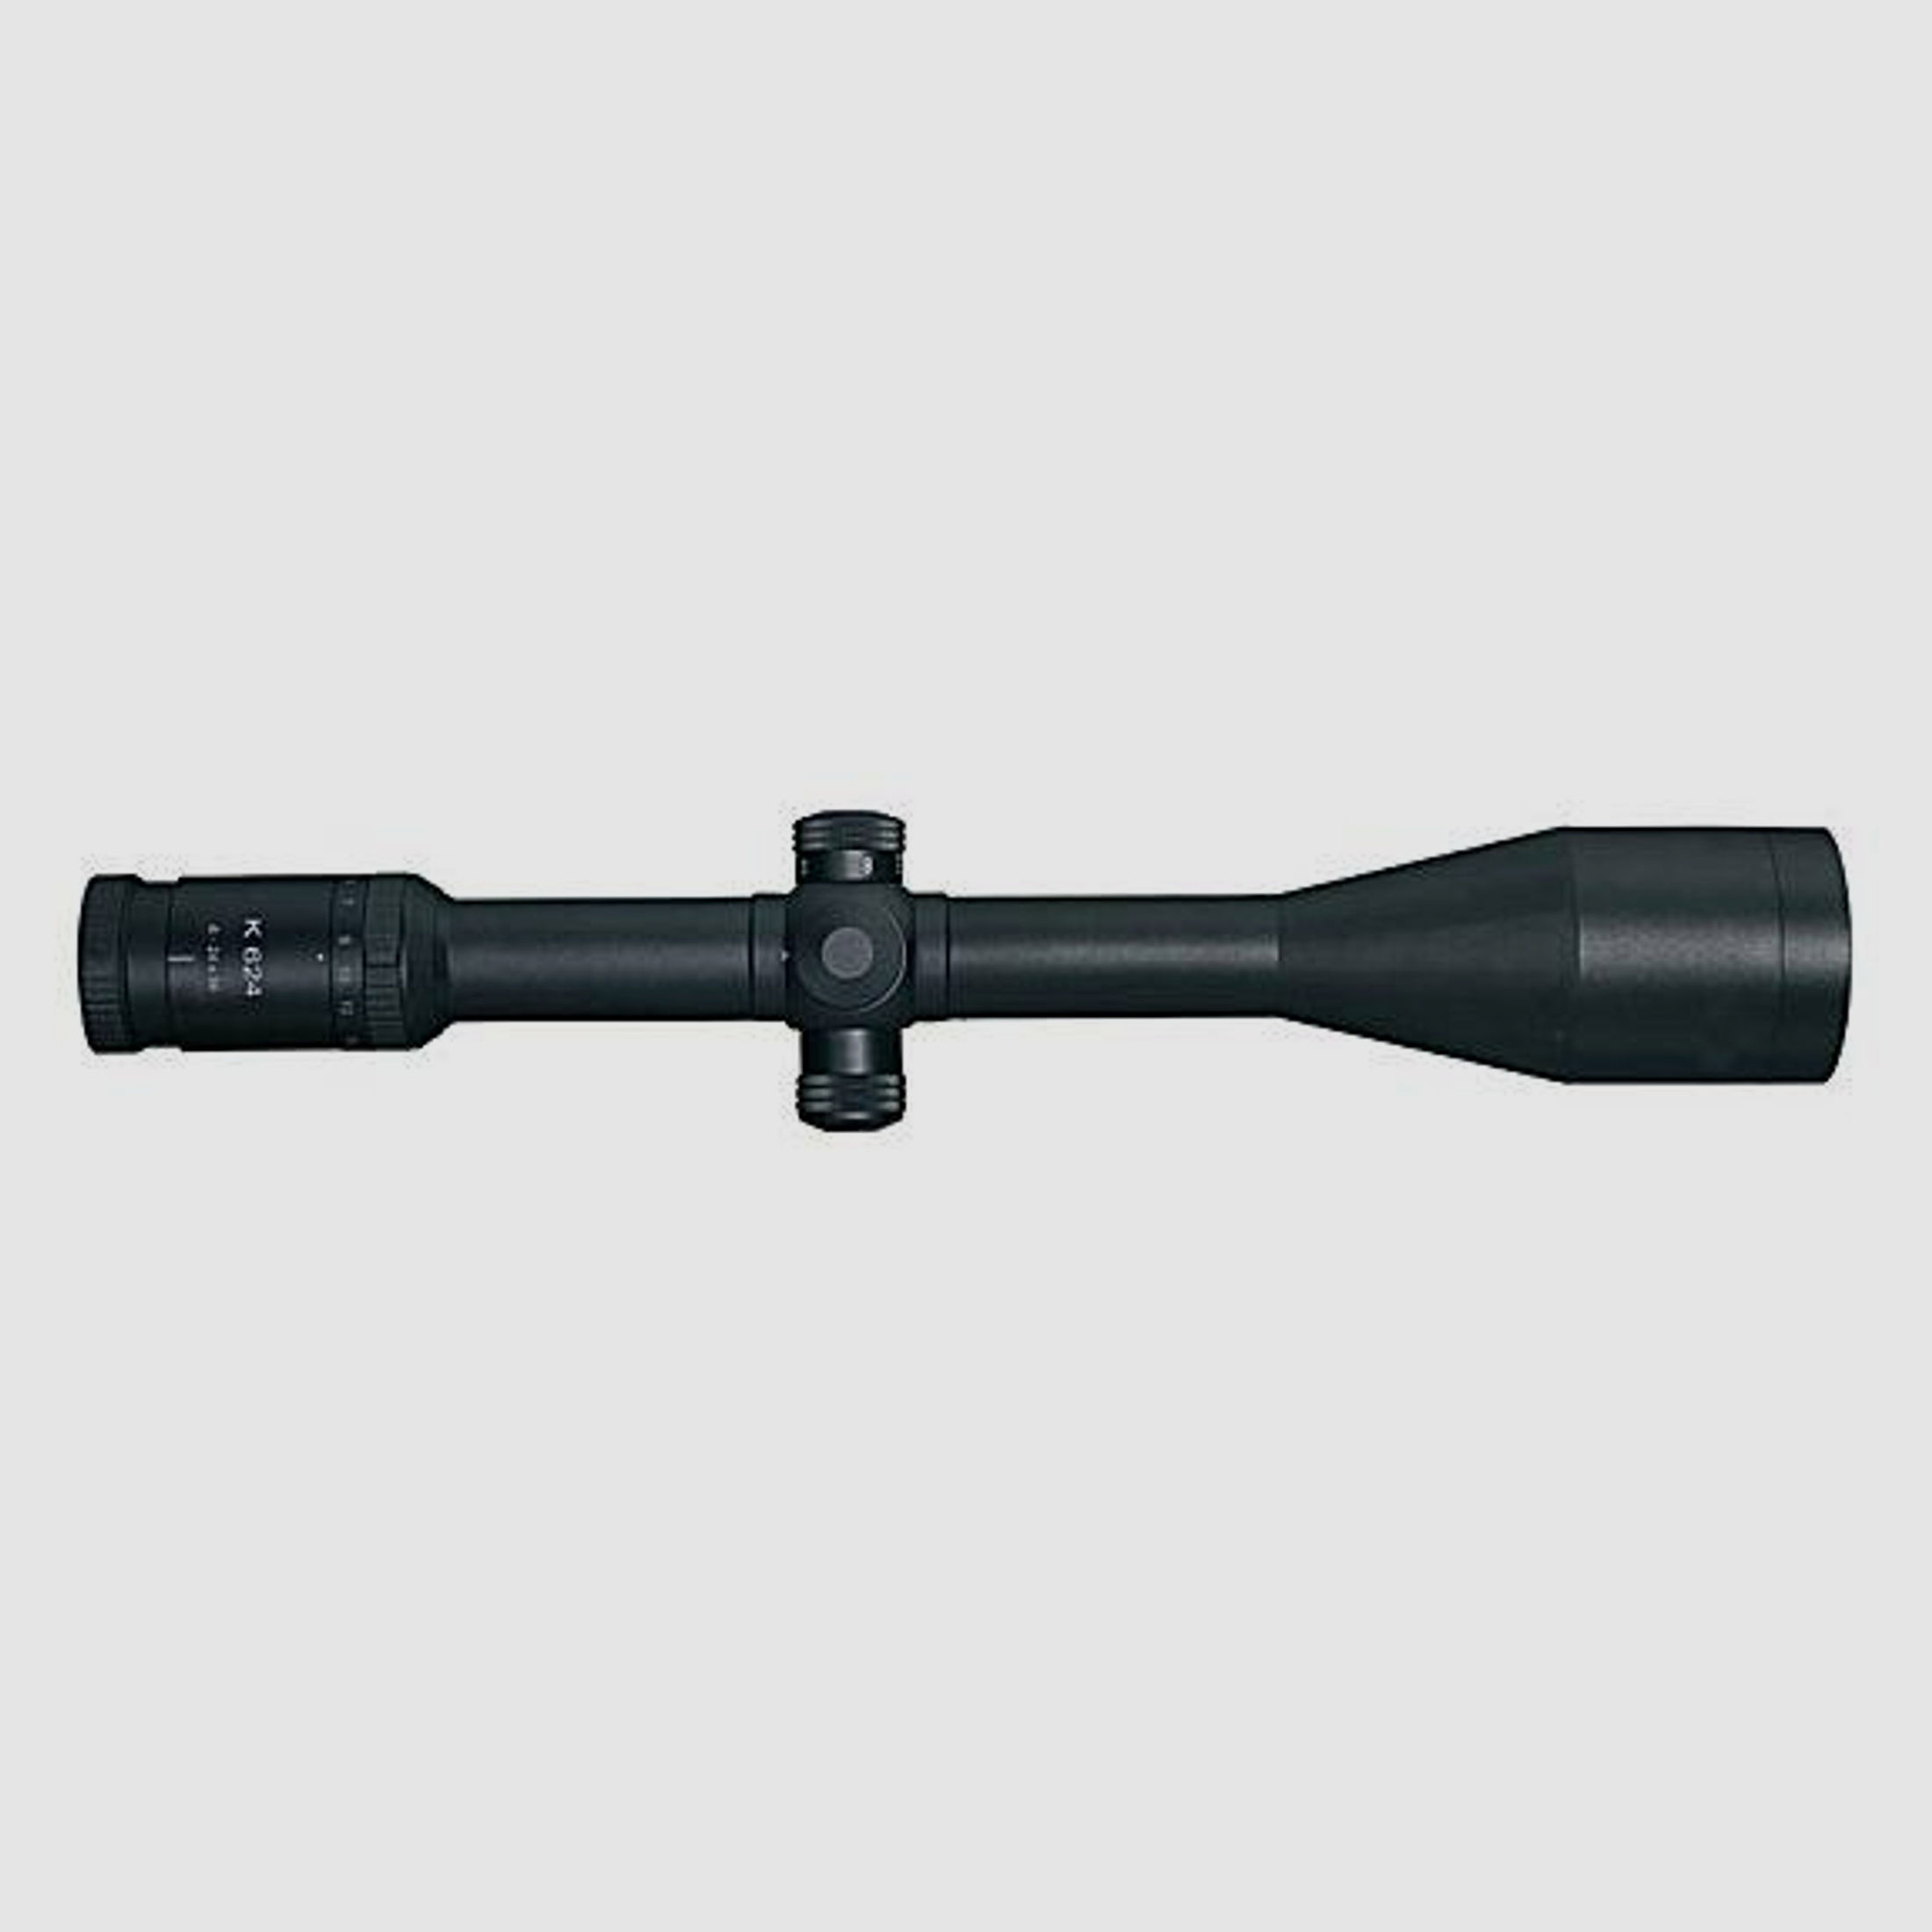 KAHLES ZF m. Leuchtabsehen (1. BE) 6-24x56 K624i ccw links Abs. SKMR4     (34mm)